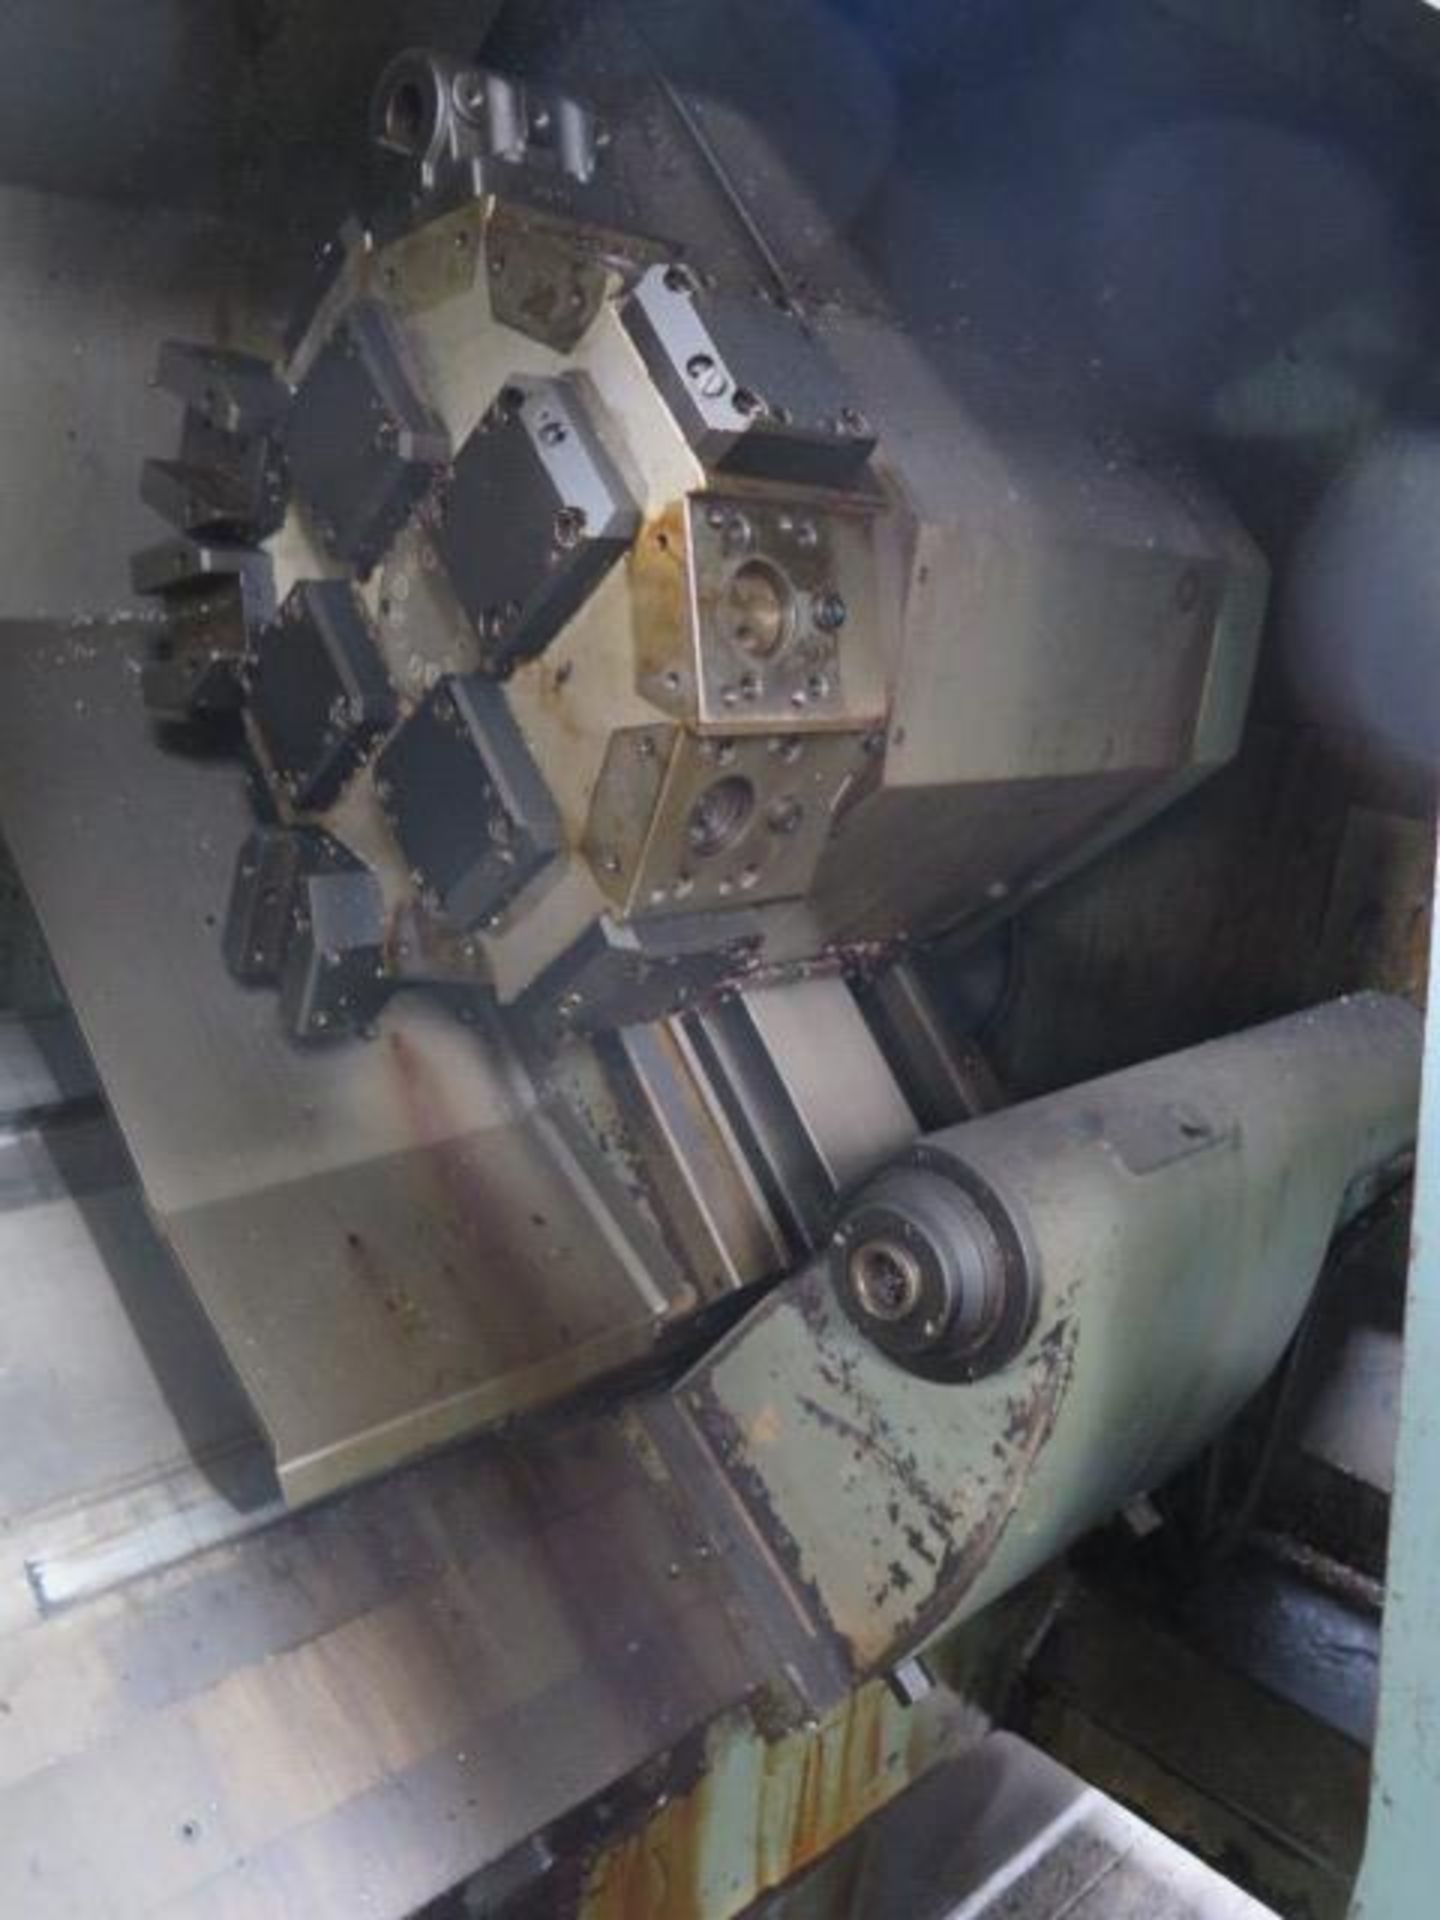 Mori Seiki SL-4T CNC Turning Center s/n 9 w/ Fanuc 6T Controls, 12-Station Turret, SOLD AS IS - Image 6 of 13